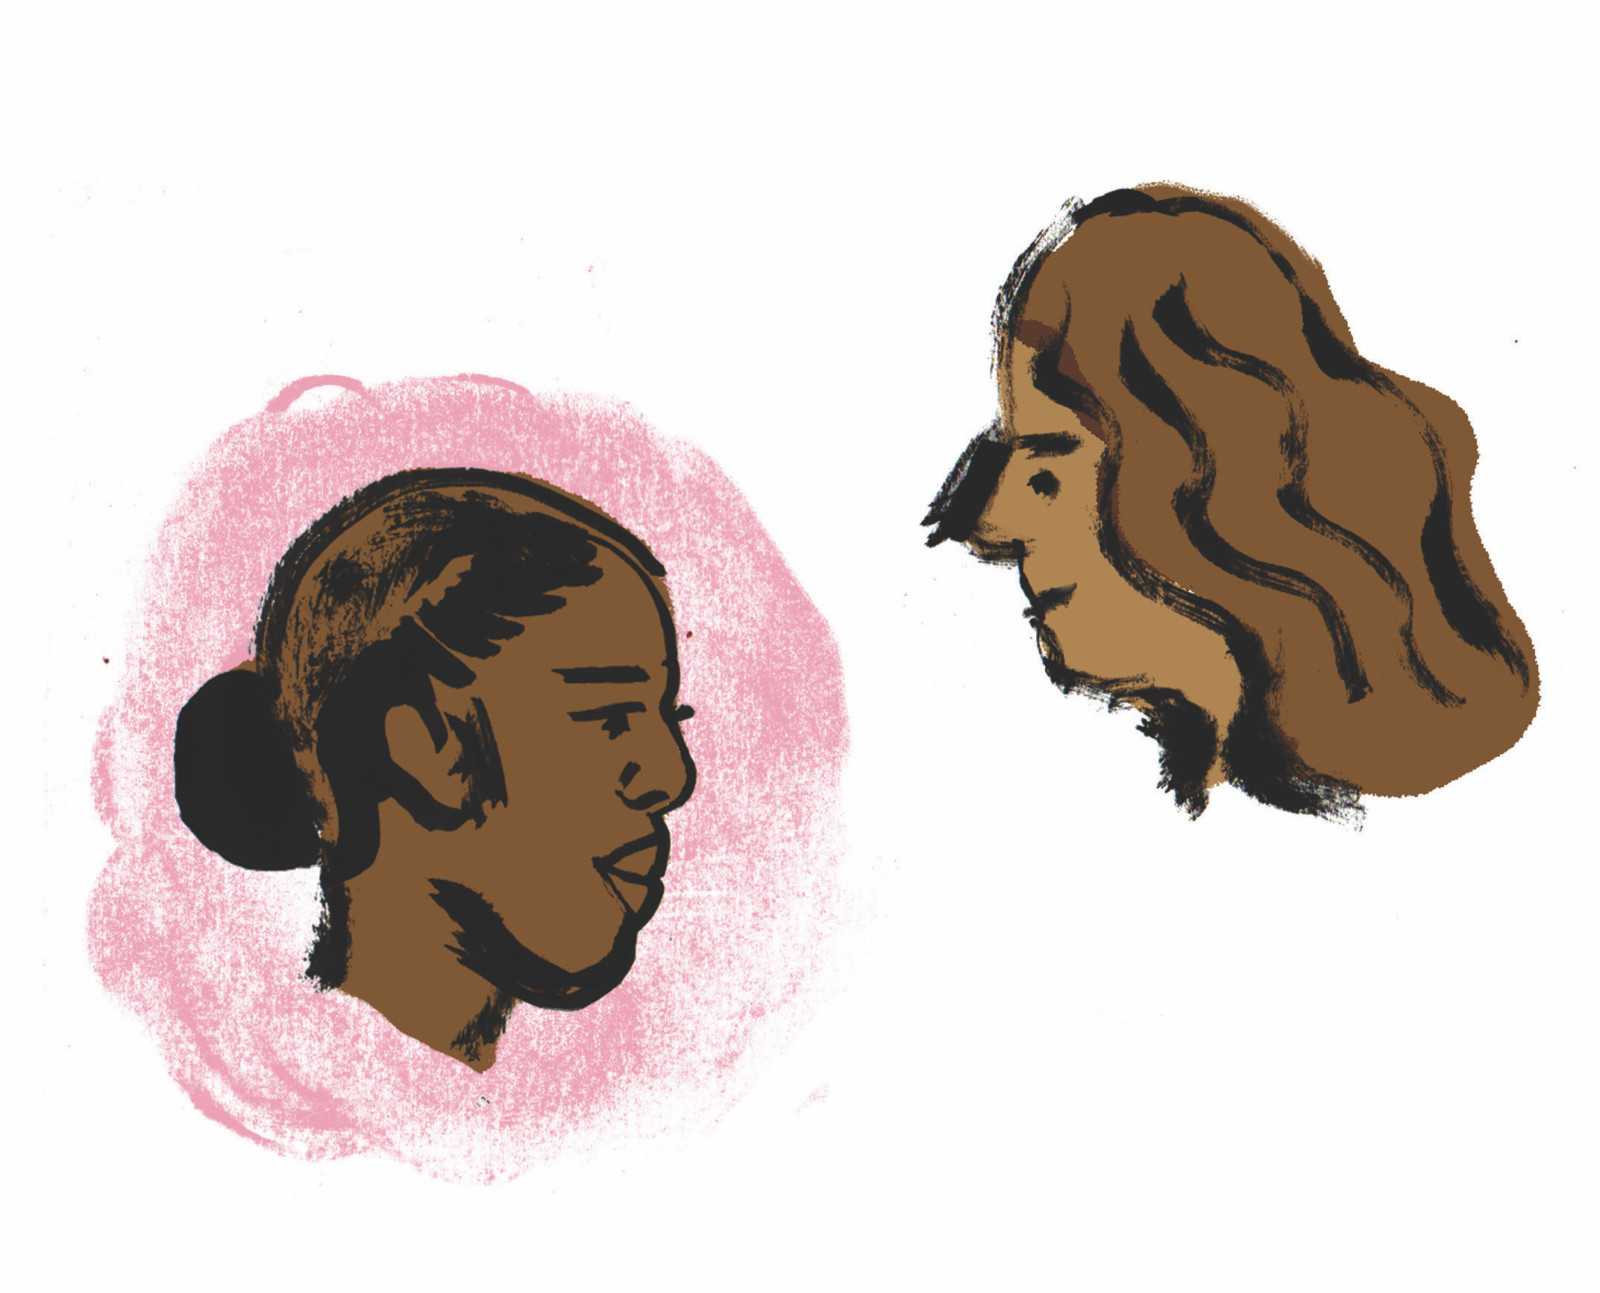 An illustration of two people's heads. One head is suspended in a light pink circle. the heads face each other, smiling. They both have brown skin and dark hair.